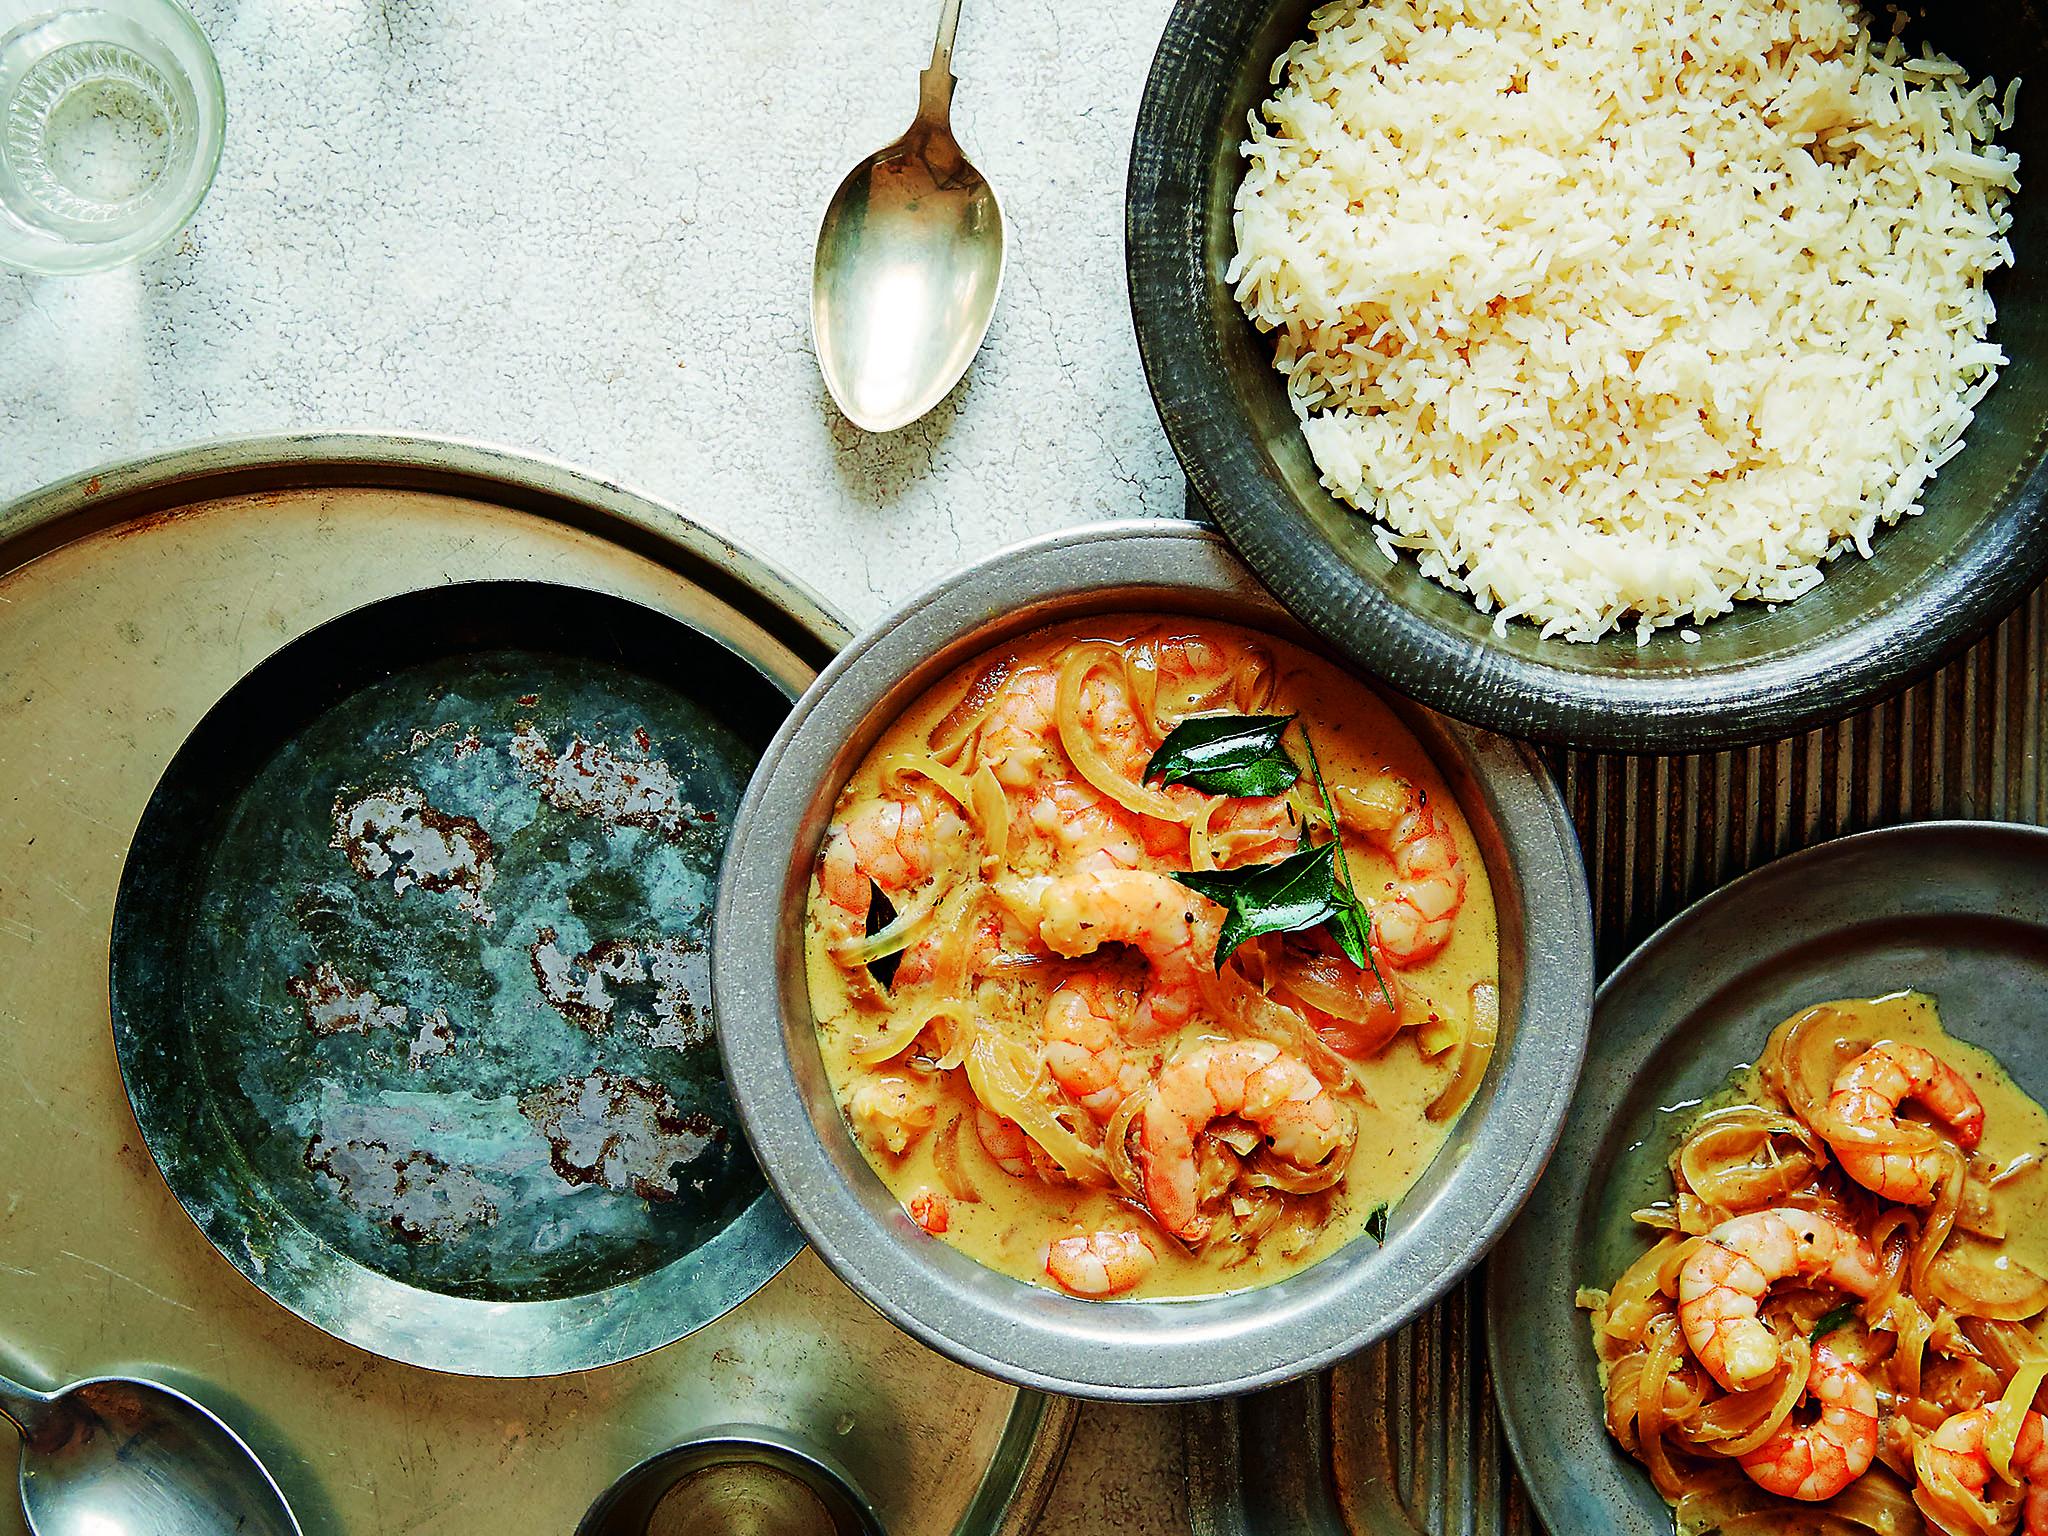 Prawn curry is packed with flavour and spice